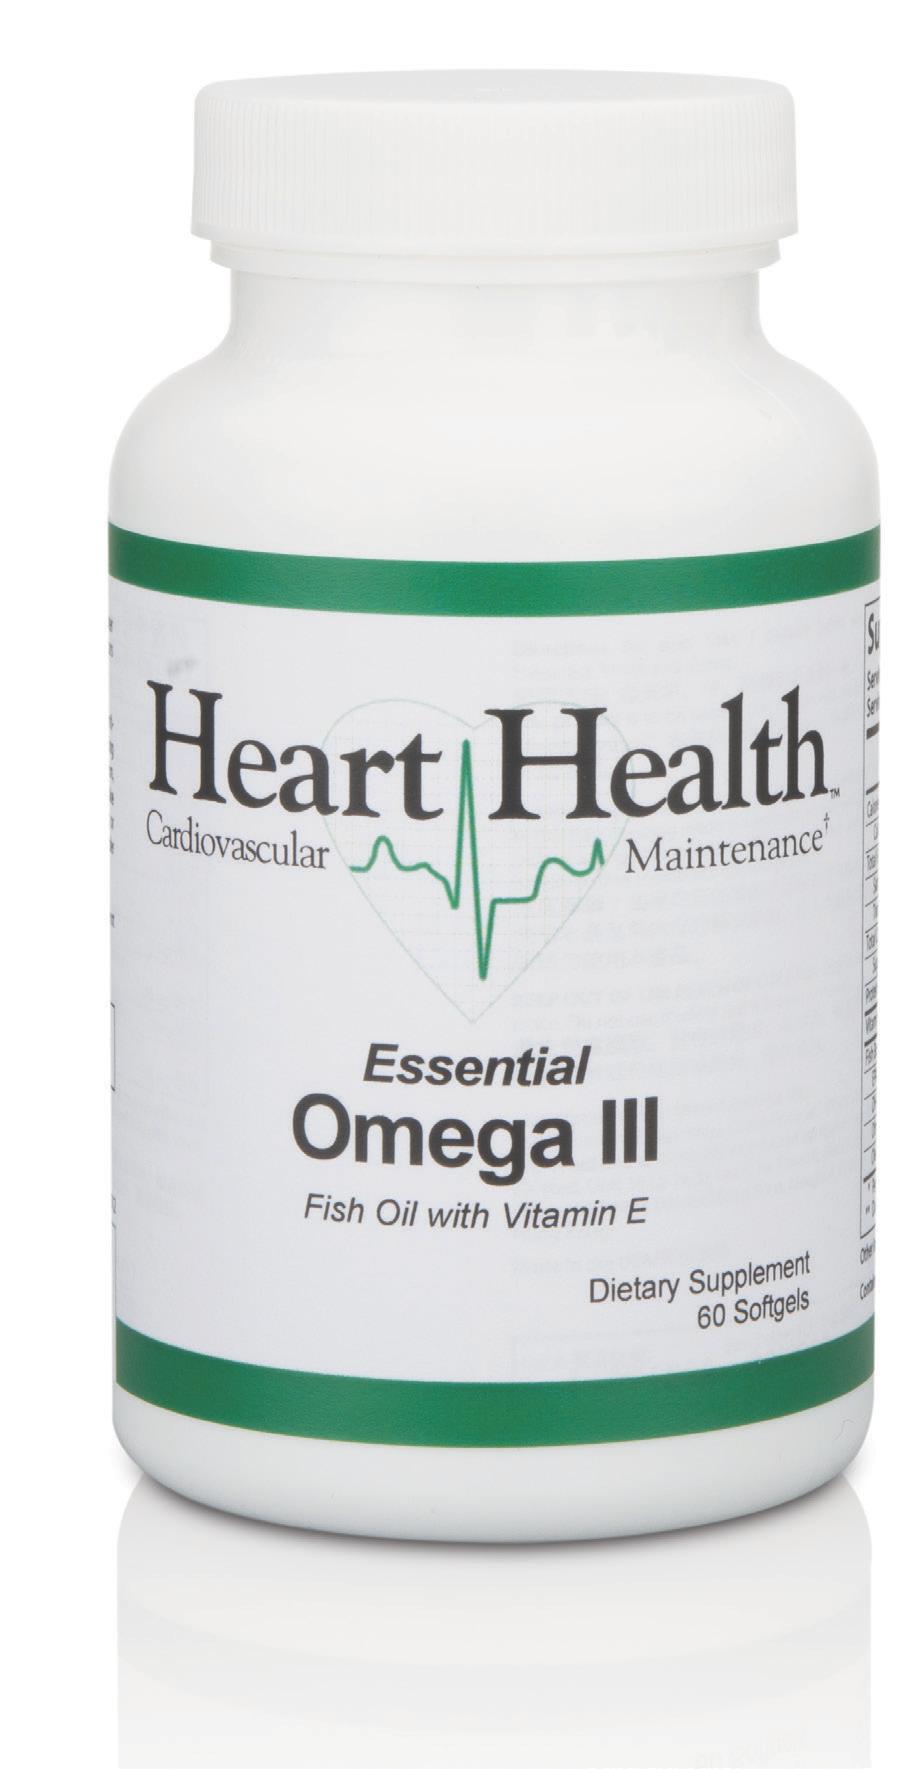 nutrametrix Heart Health Essential Omega III Fish Oil with Vitamin E Supports relief from temporary inflammation associated with the normal